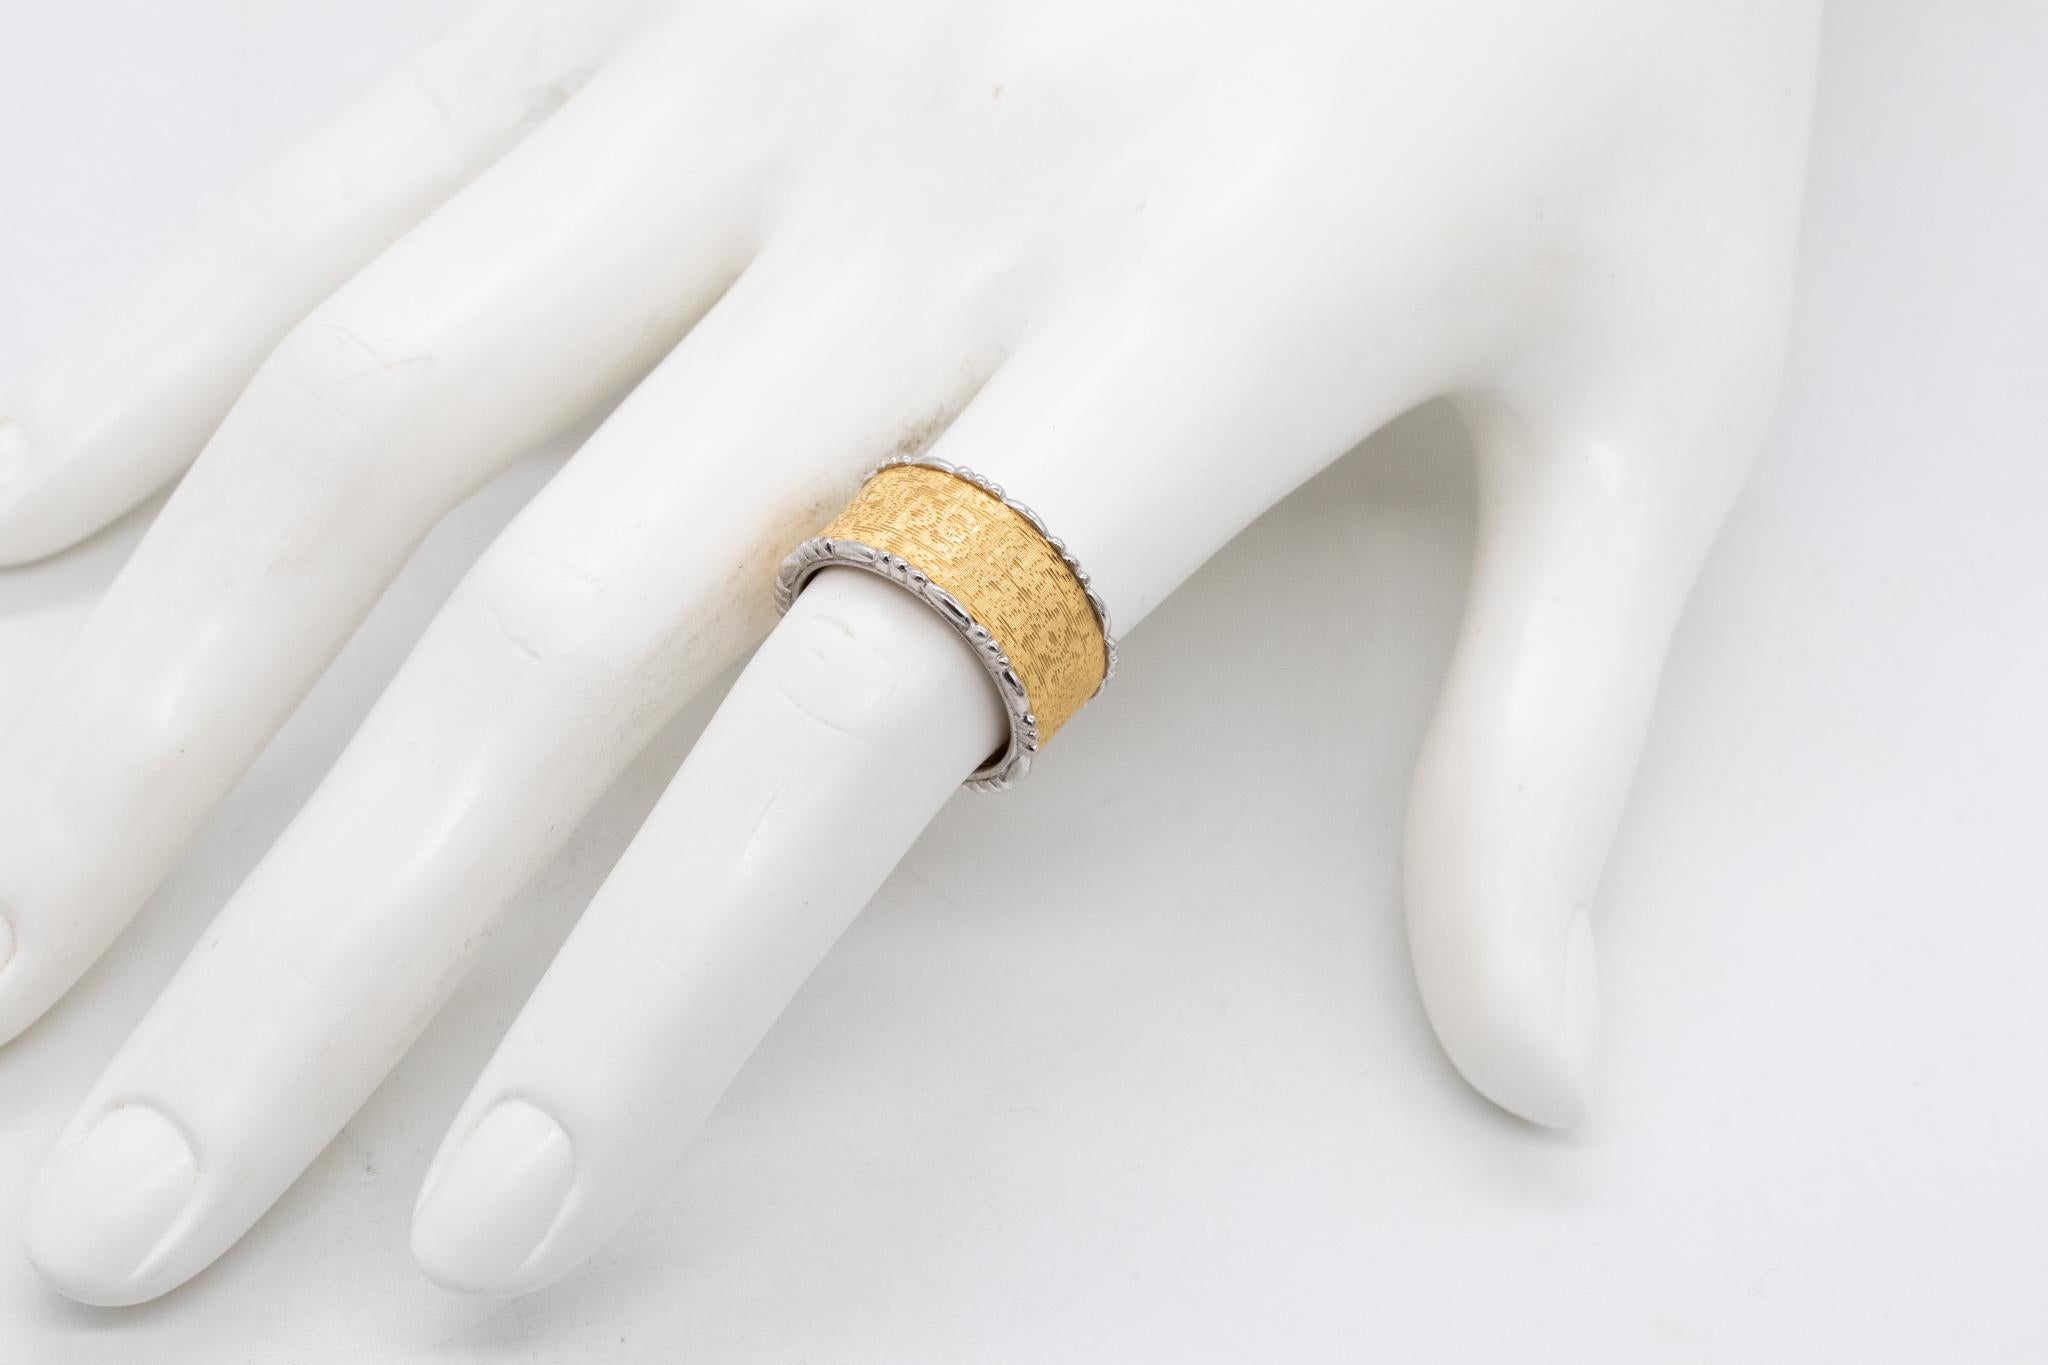 A limited edition ring designed by Buccellati.

Beautiful piece from a limited edition from the house of Buccellati. Crafted in Milano, Italy, with intricate details in solid 18 karats of textured brushed yellow gold with the both sides accented in